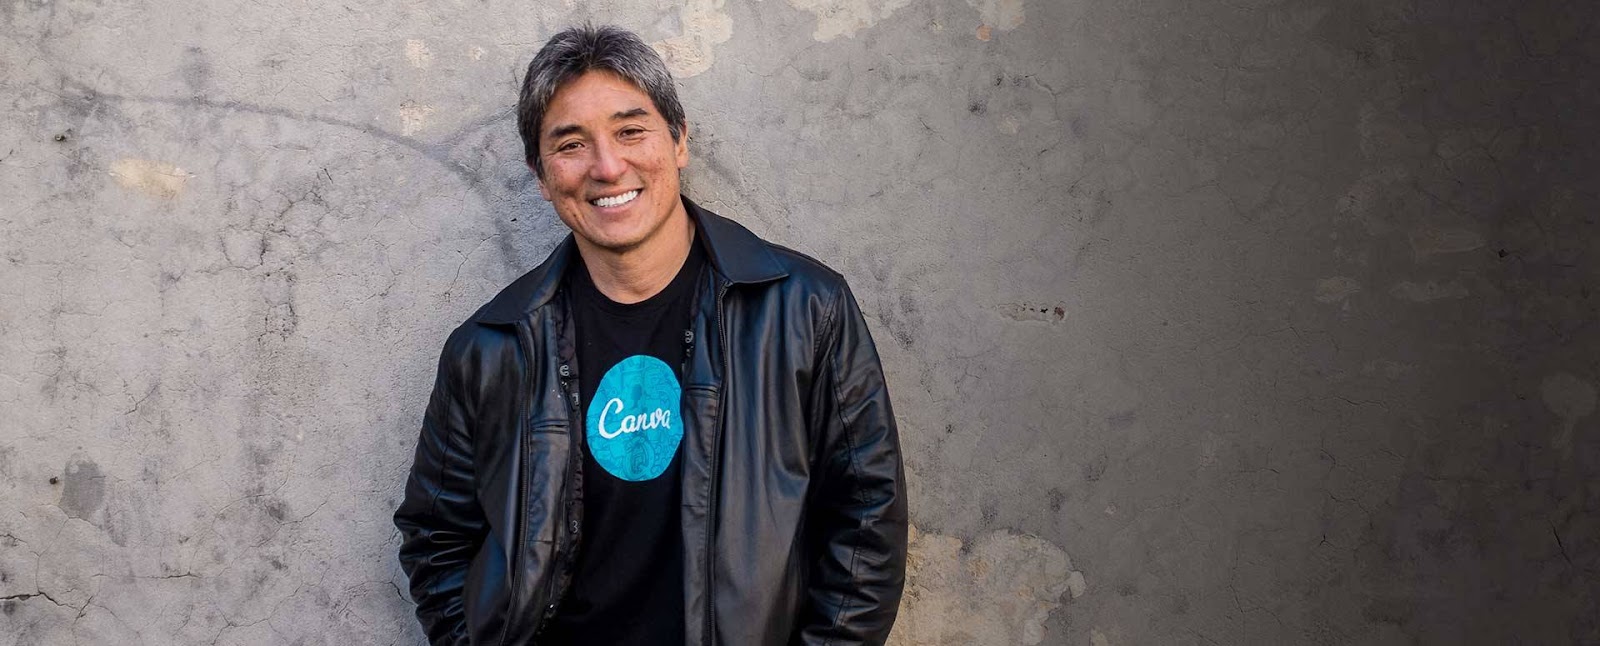 Guy Kawasaki is One of the Famous Digital Marketing Experts Known for His Works at Apple